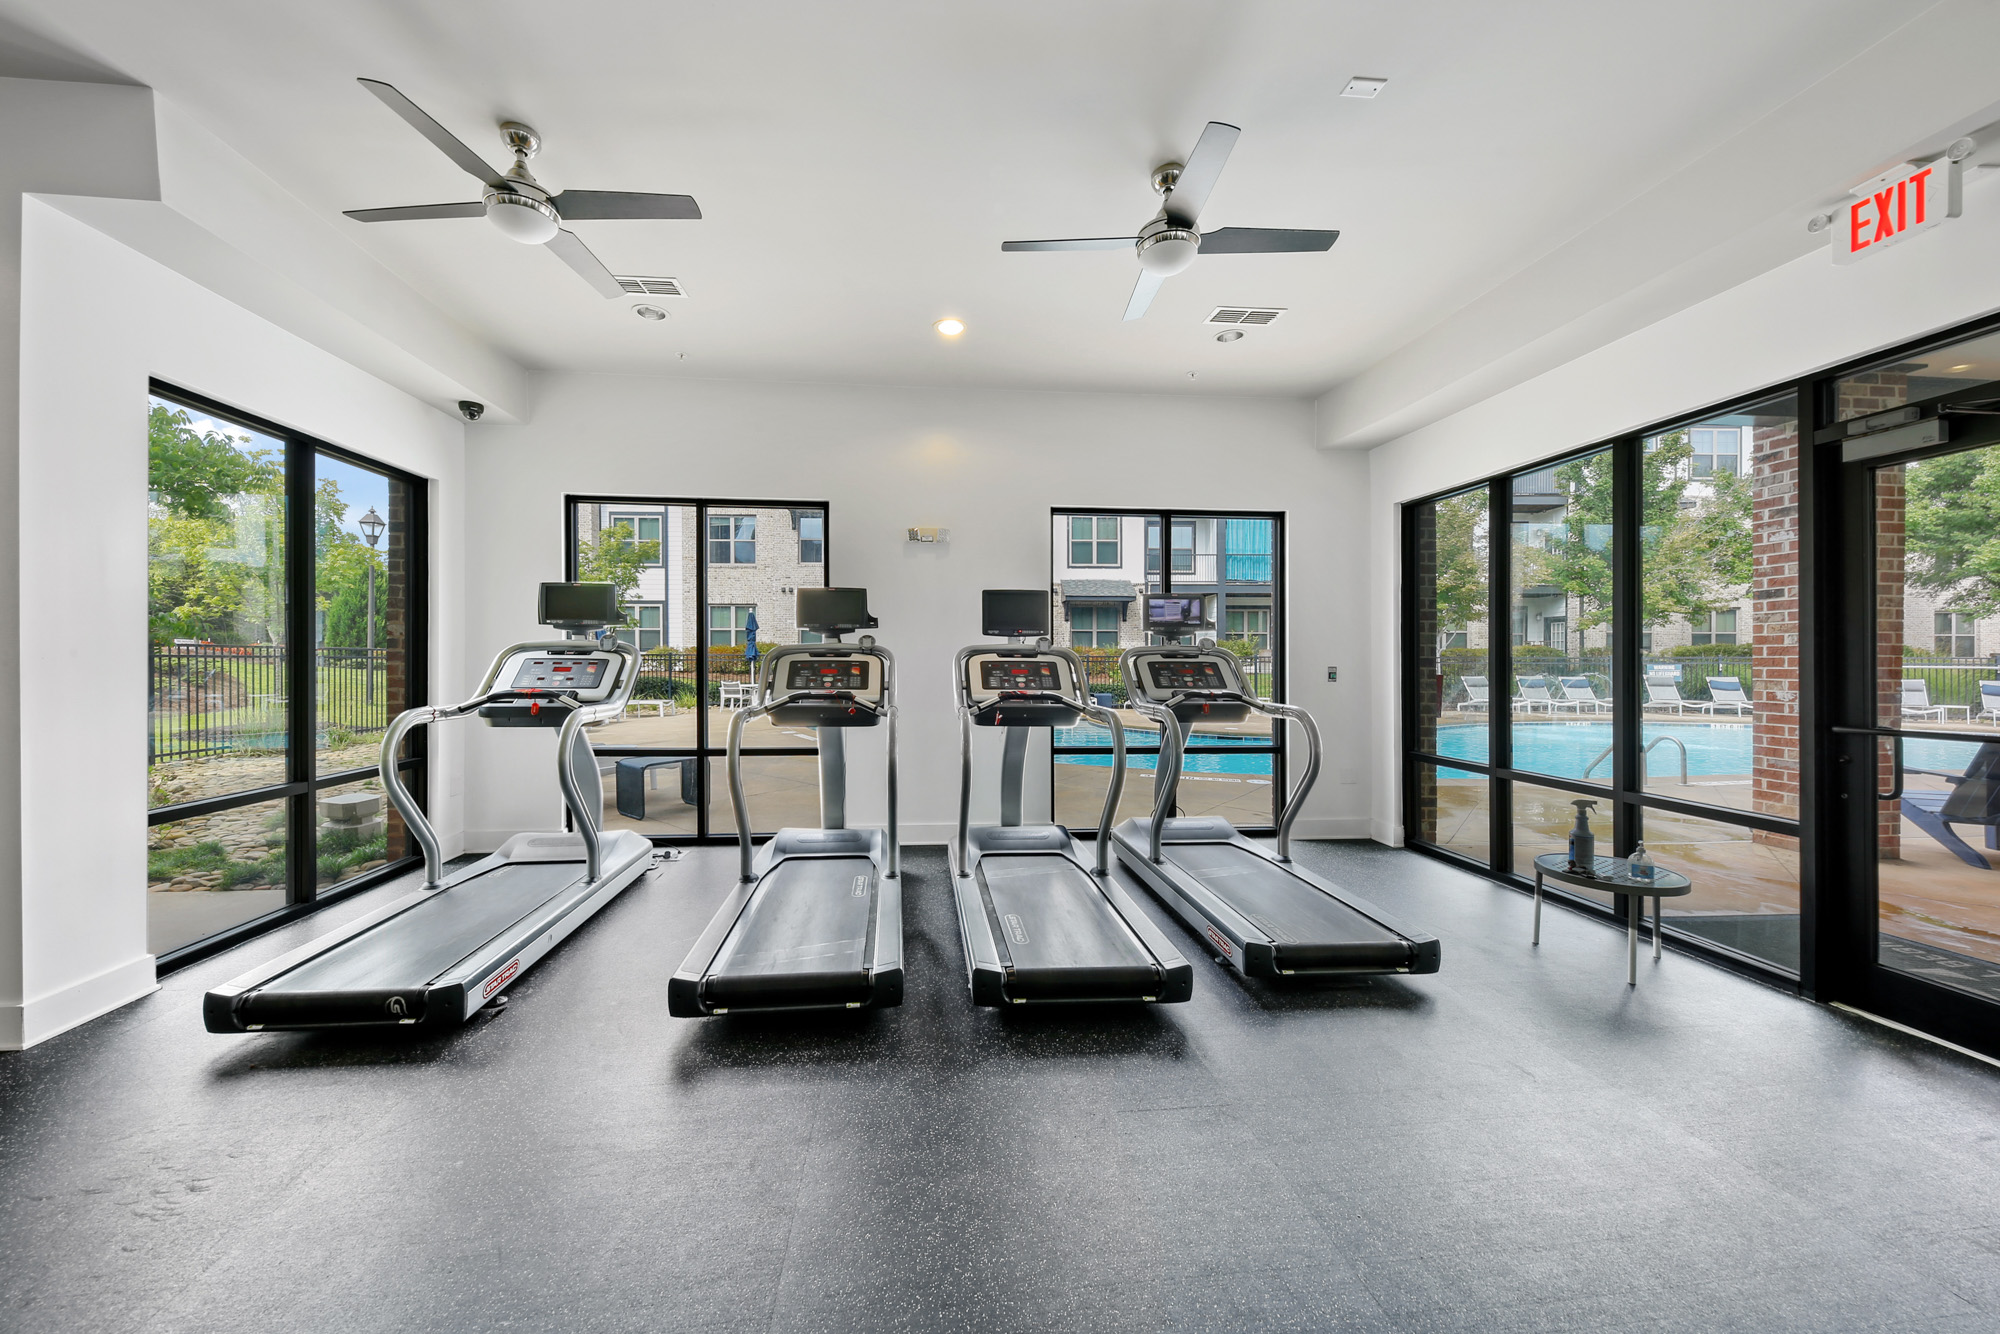 The fitness center at Park 9 apartments in Woodstock, GA.